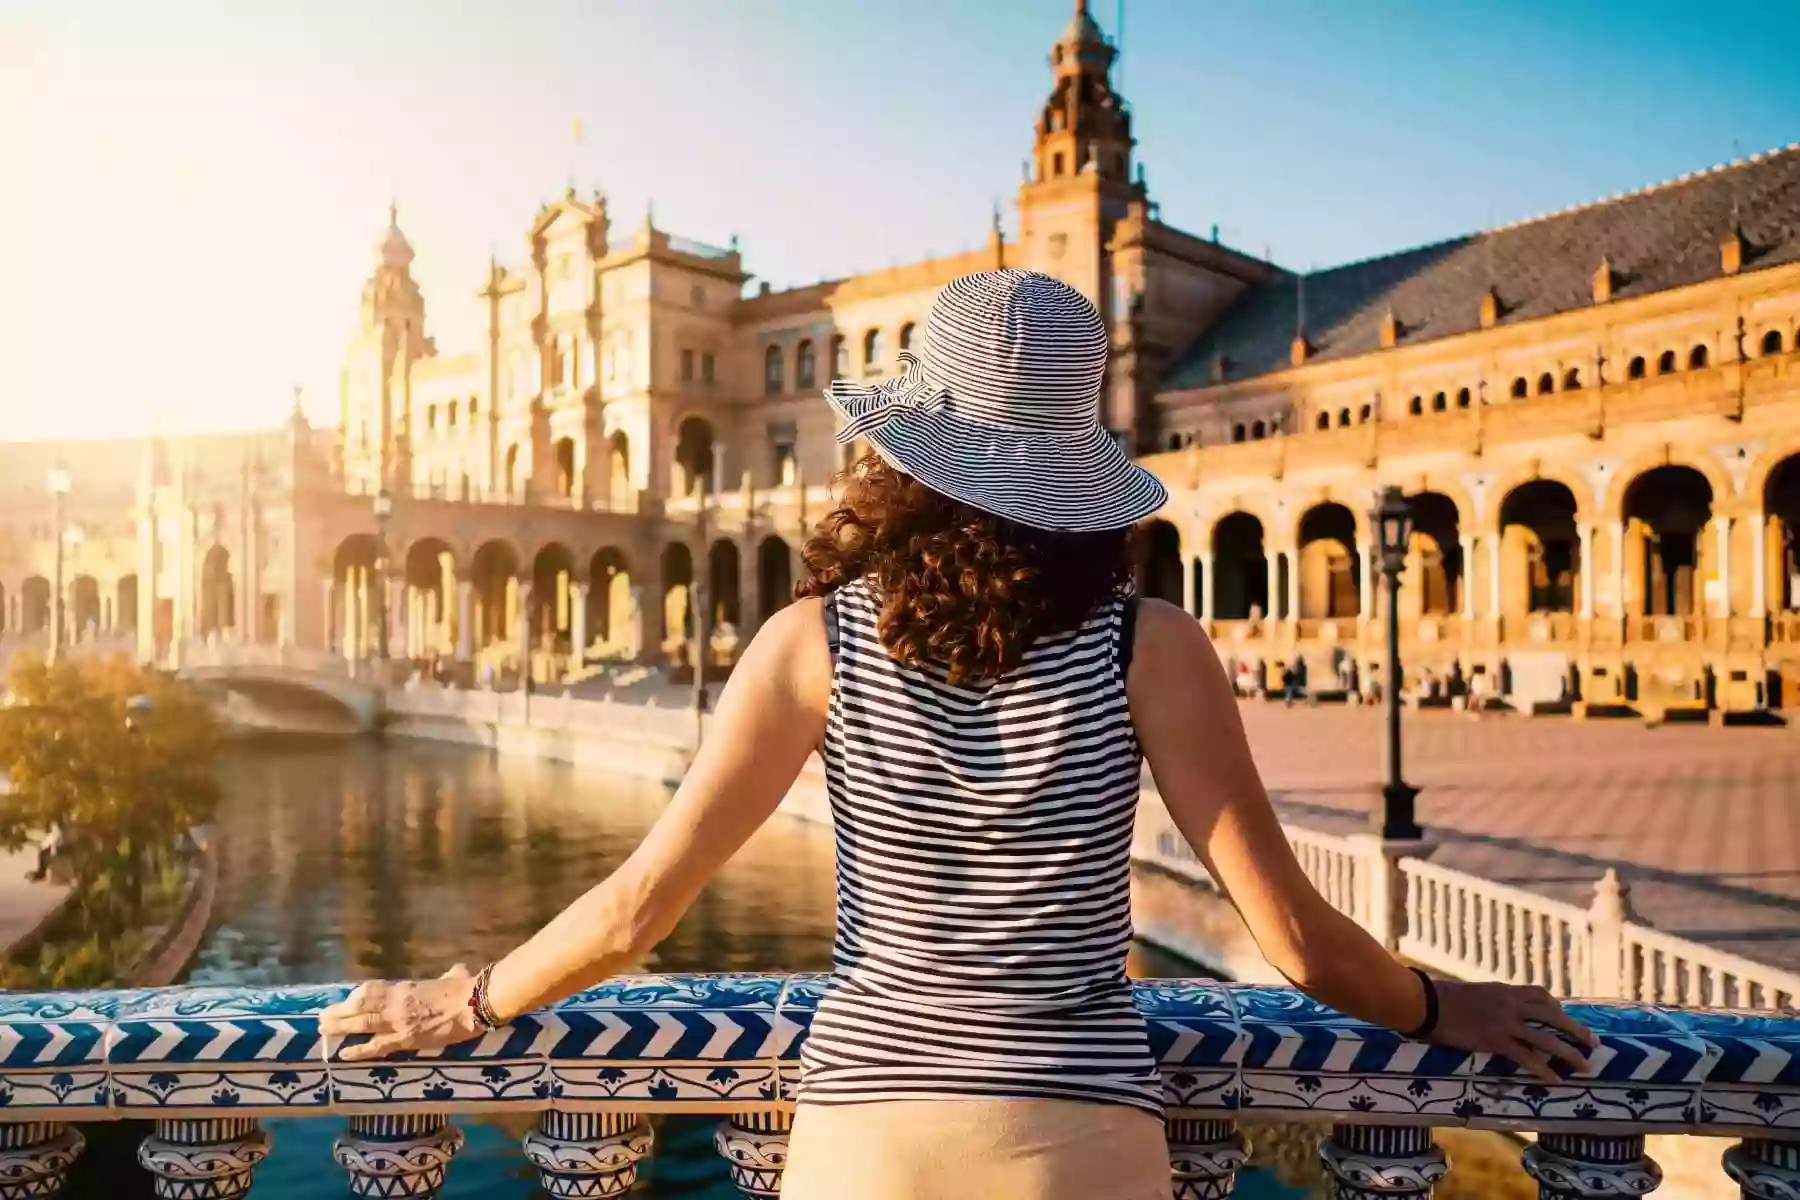 Planning to have an unforgettable vacation in Spain? Here are the perfect areas to visit!